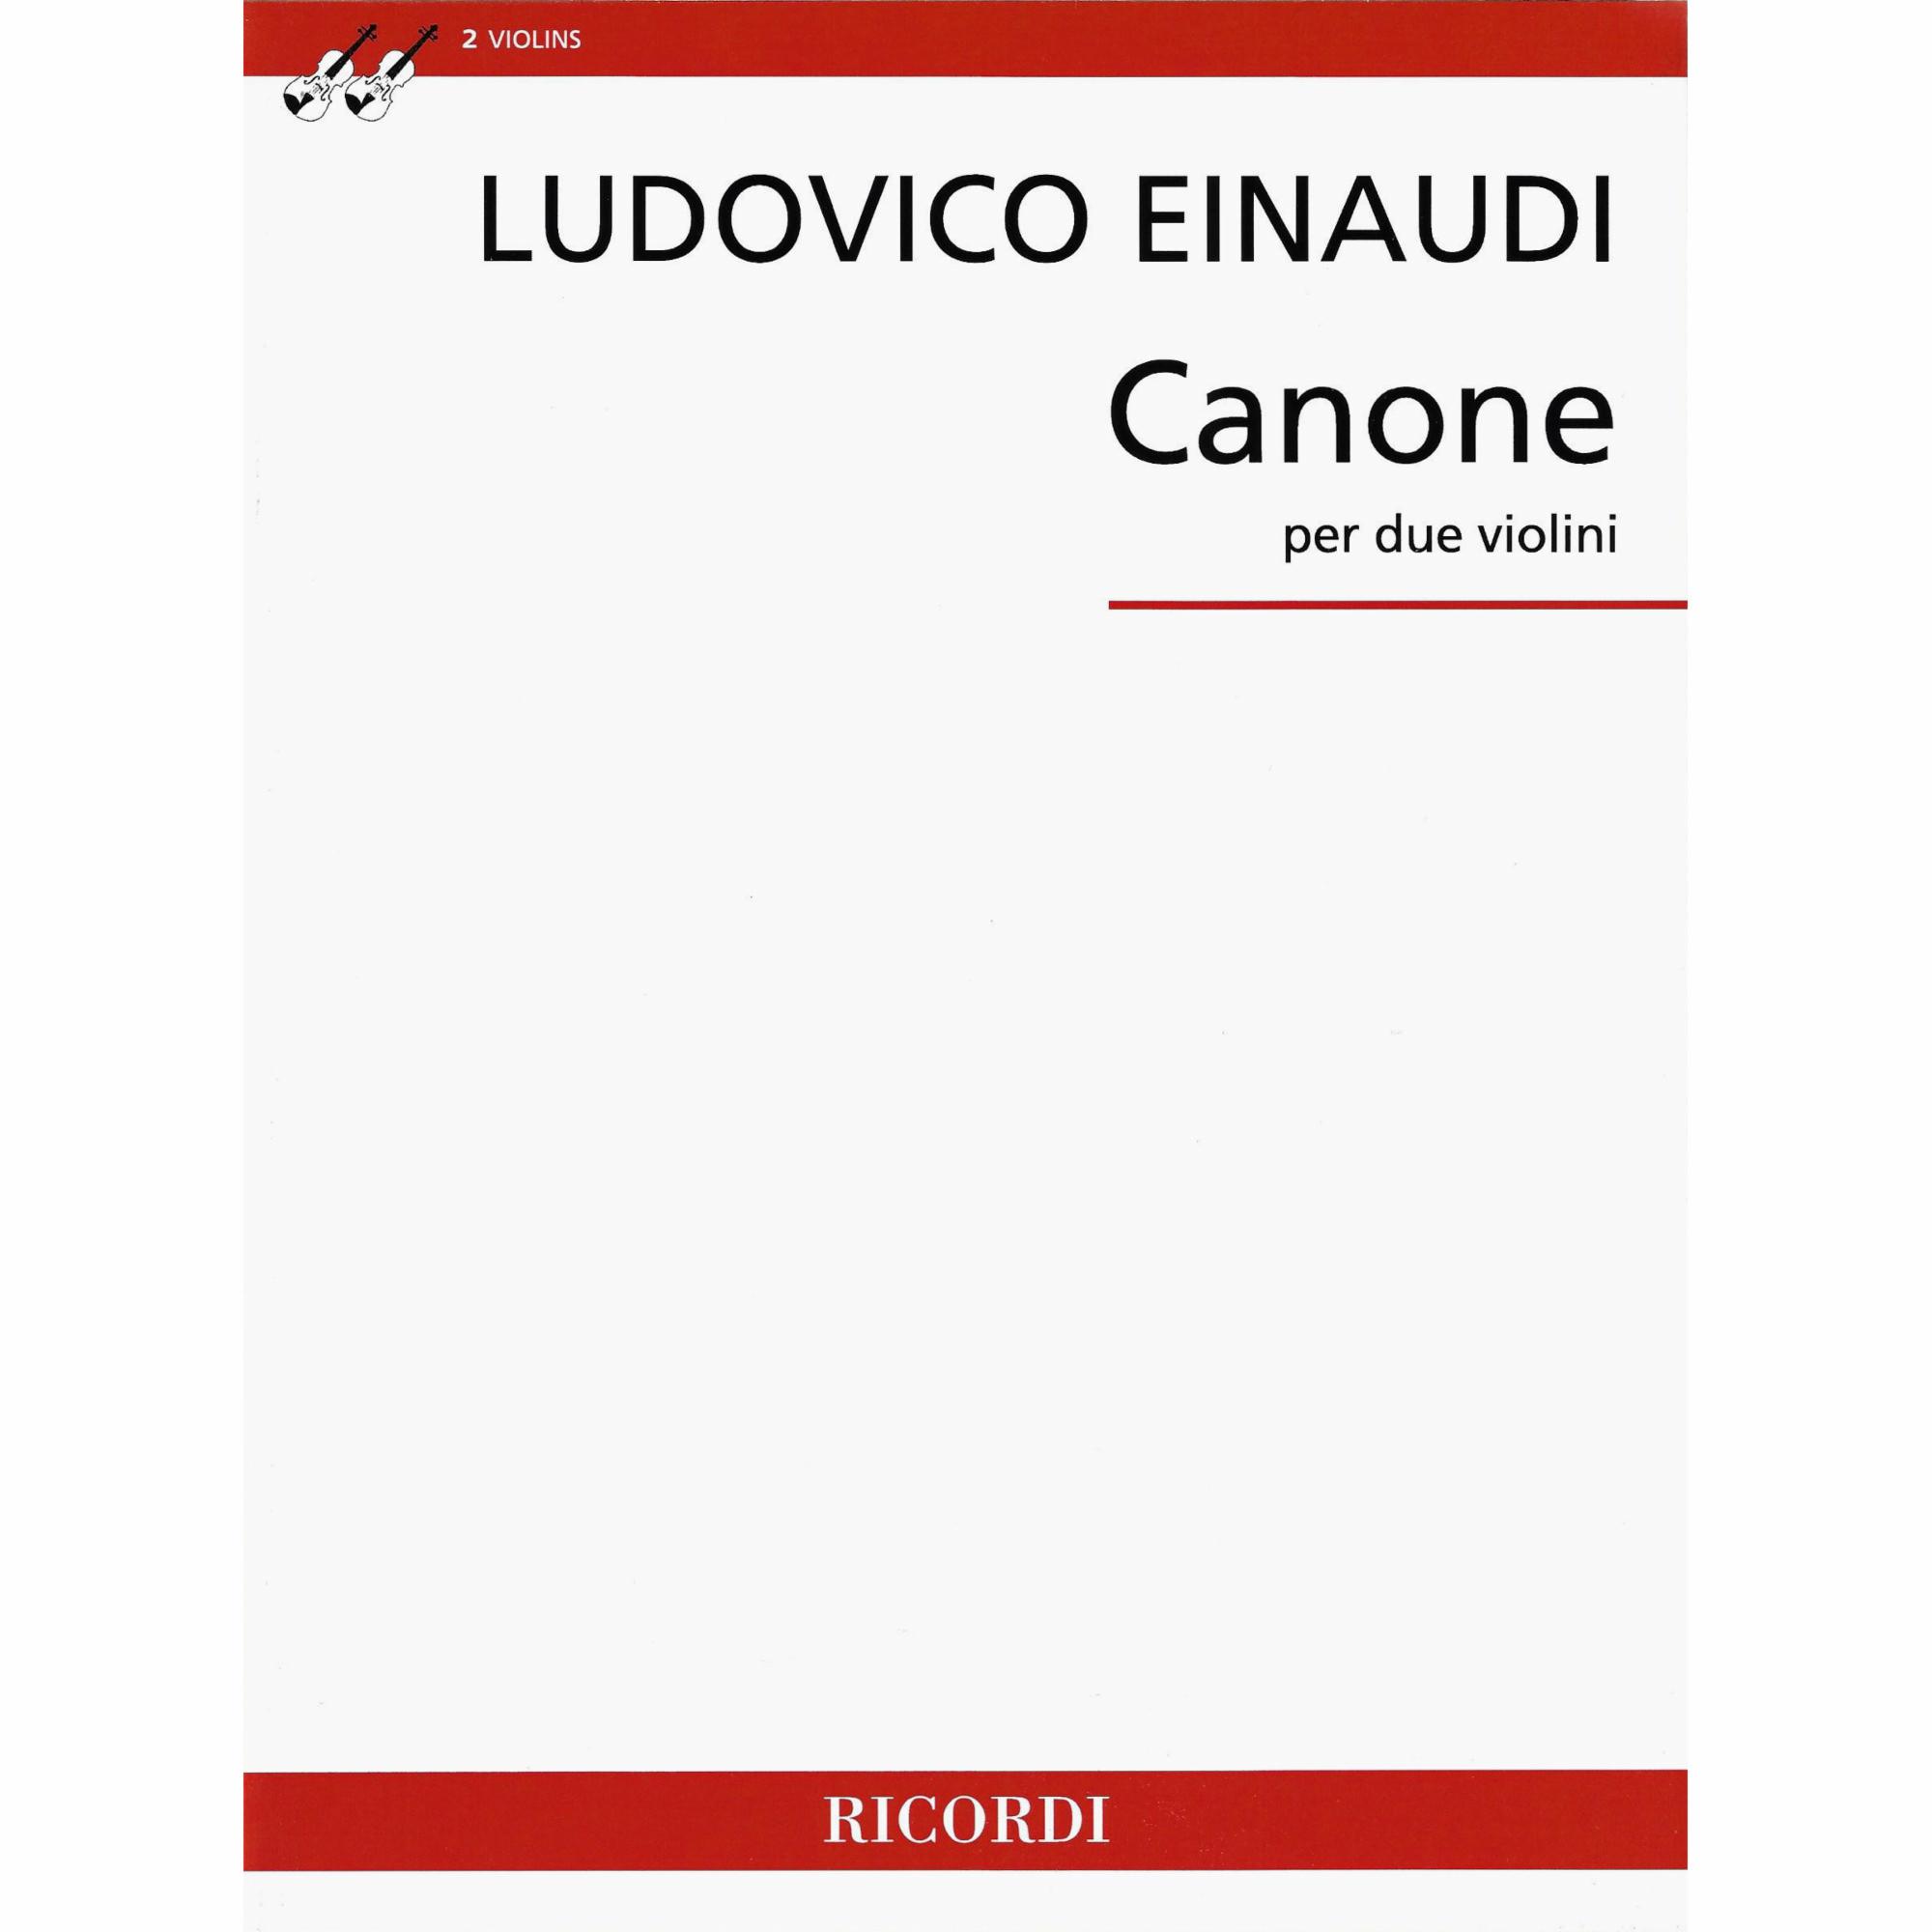 Einaudi -- Canone for Two Violins